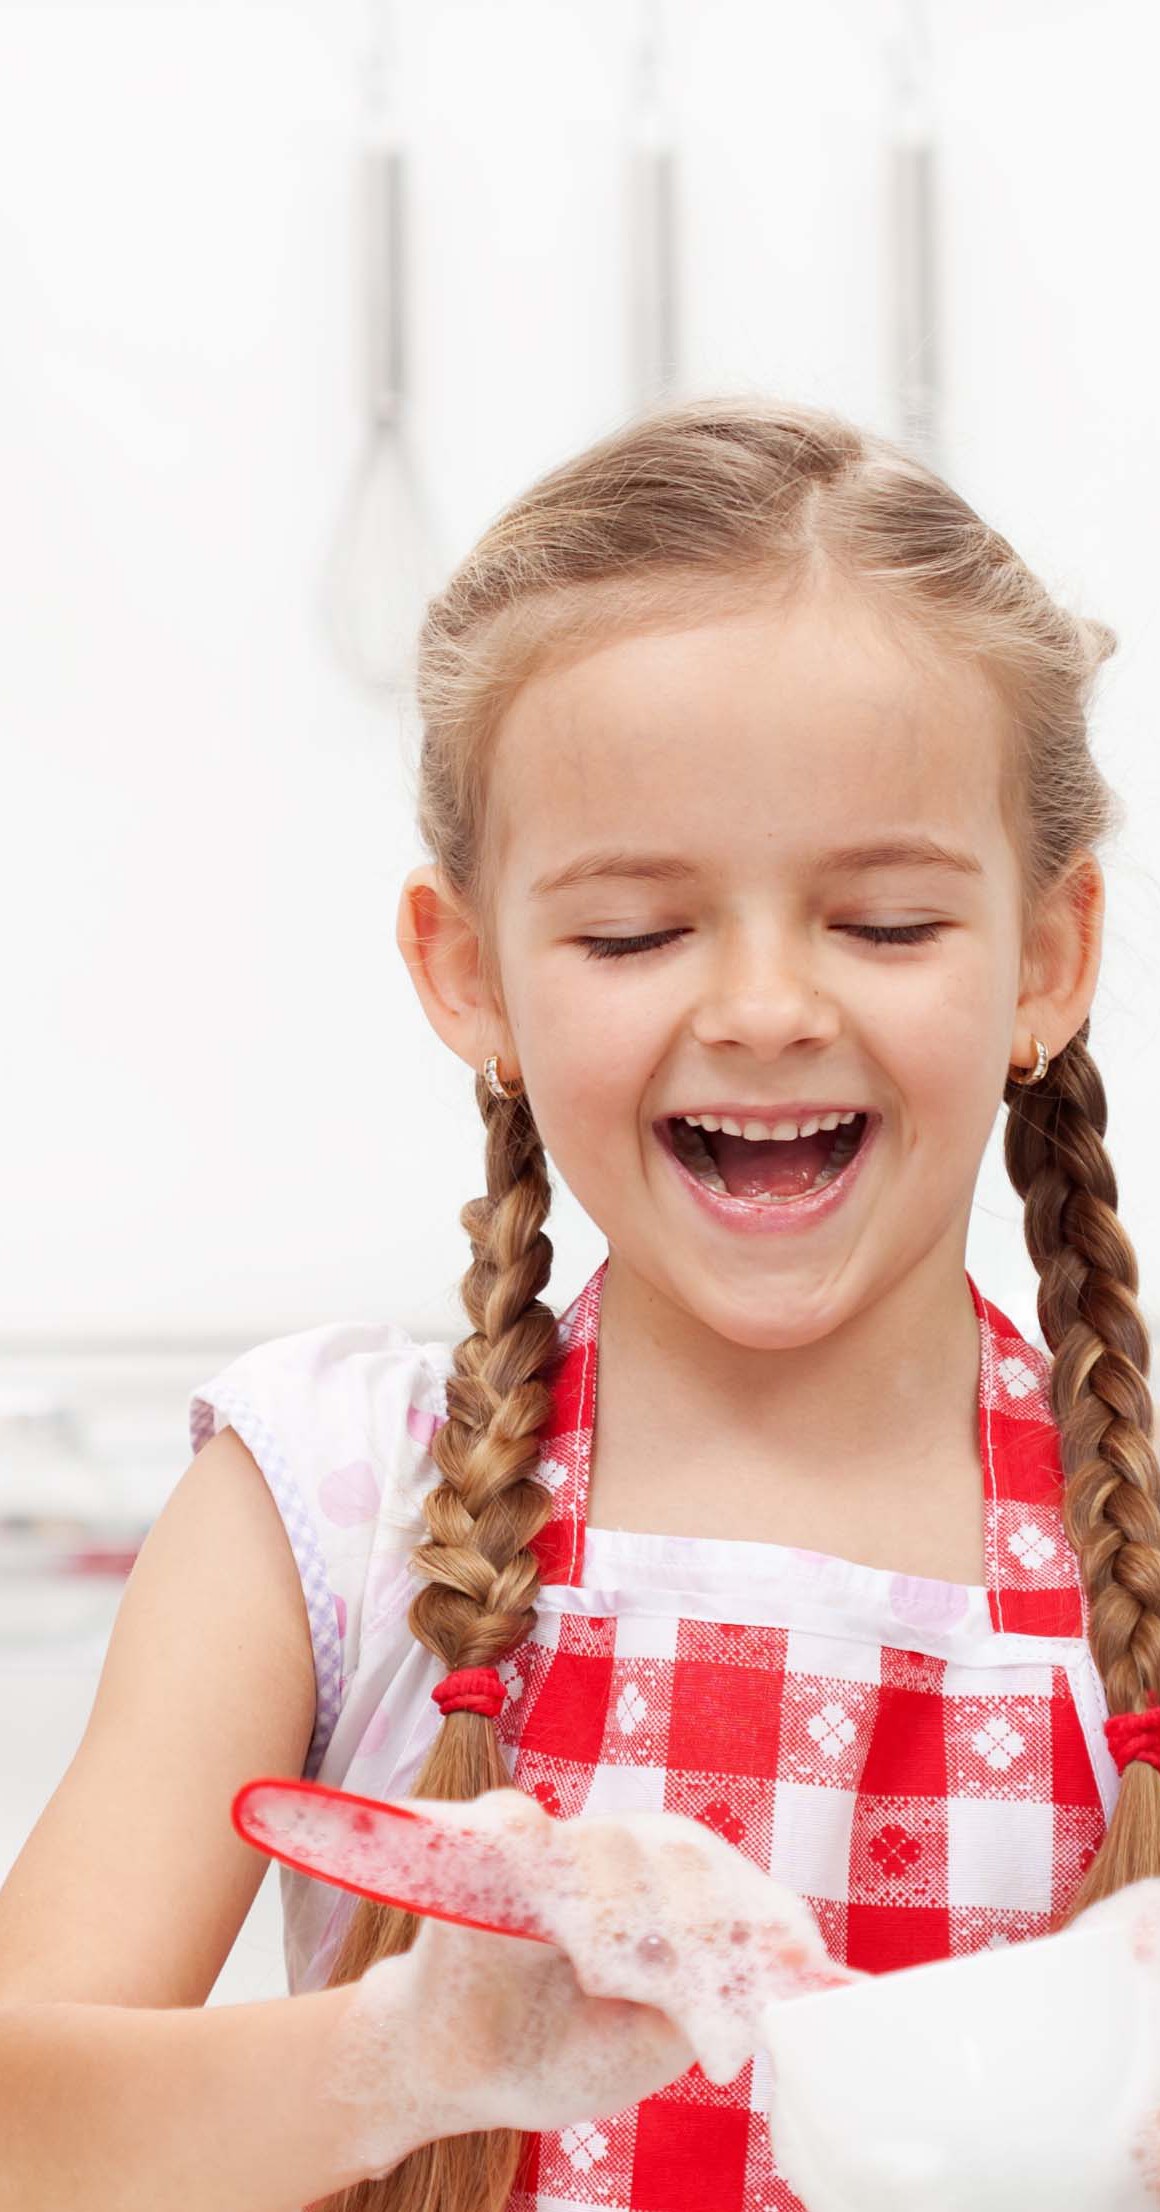 5 Innovative Ways To Motivate Your Kids To Enjoy Chores